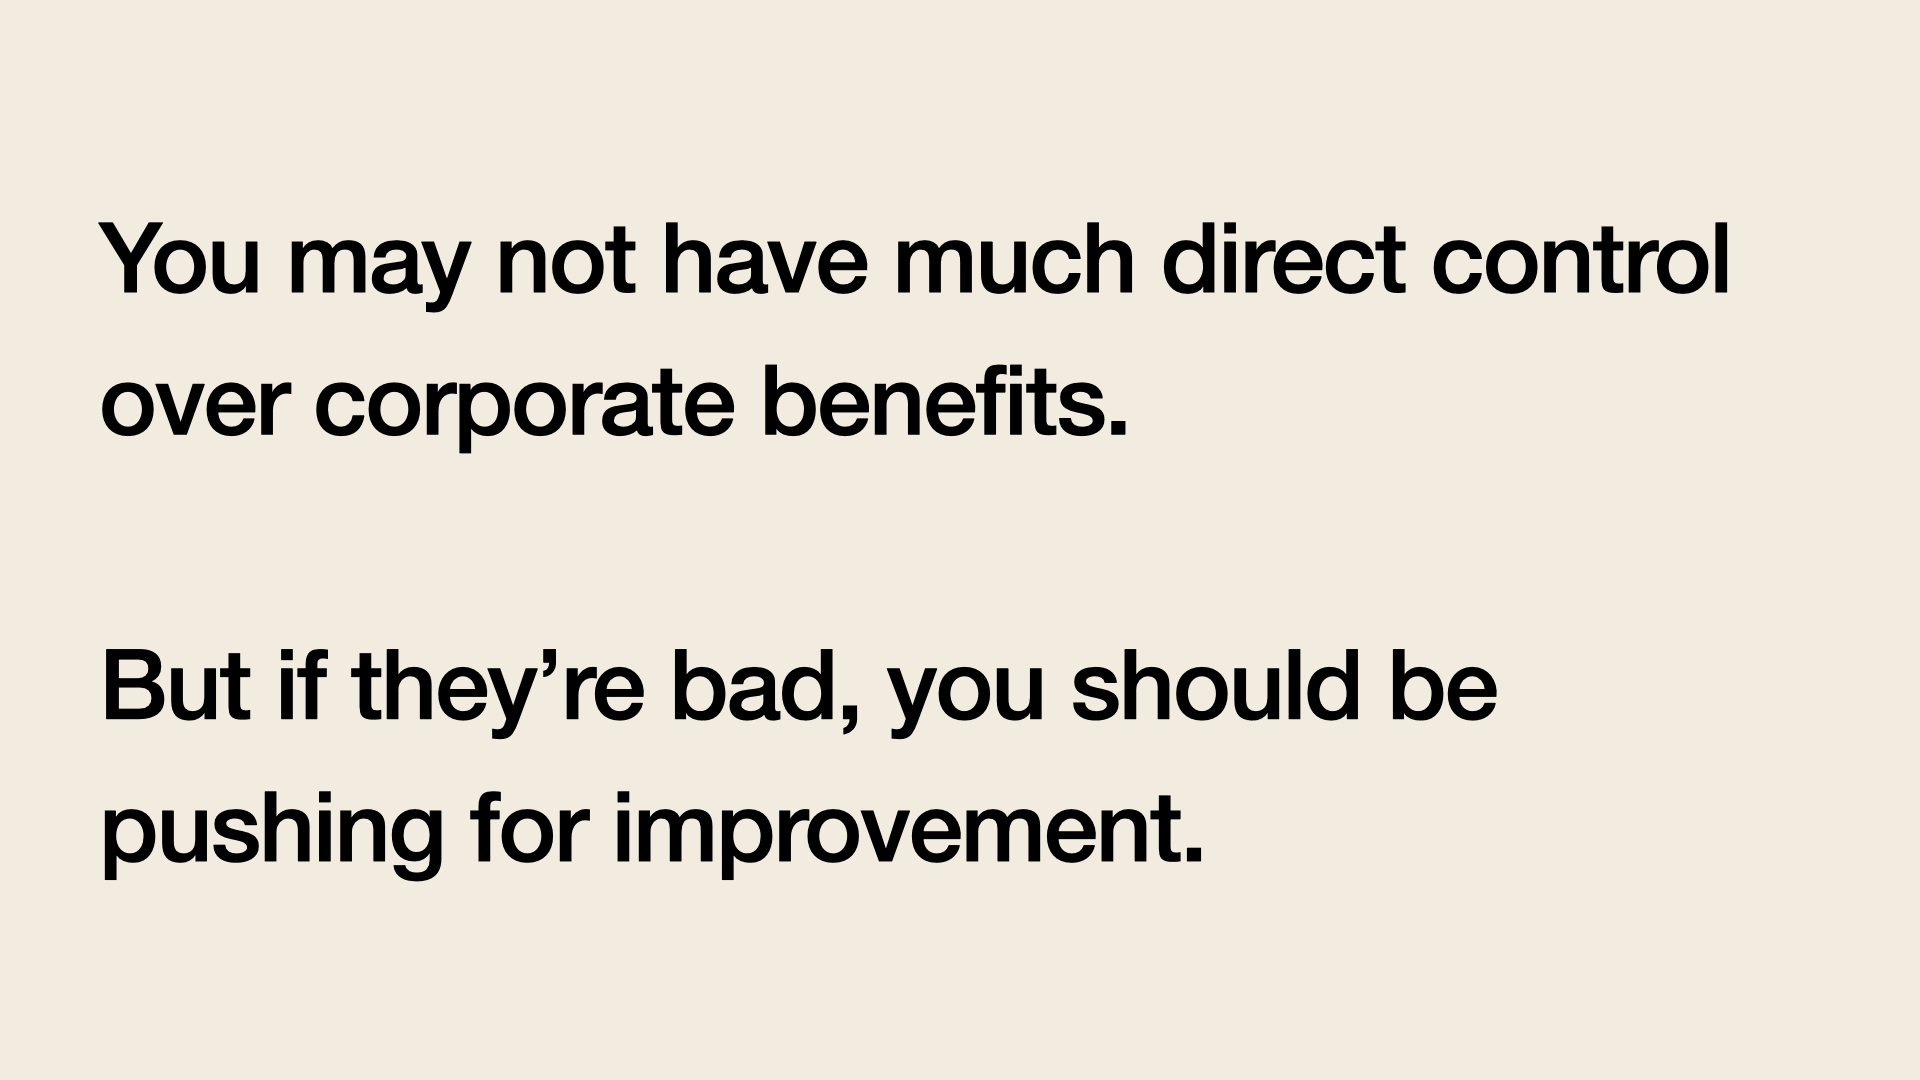 You may not have much direct control over corporate benefits. But if they're bad, you should be pushing for improvement.